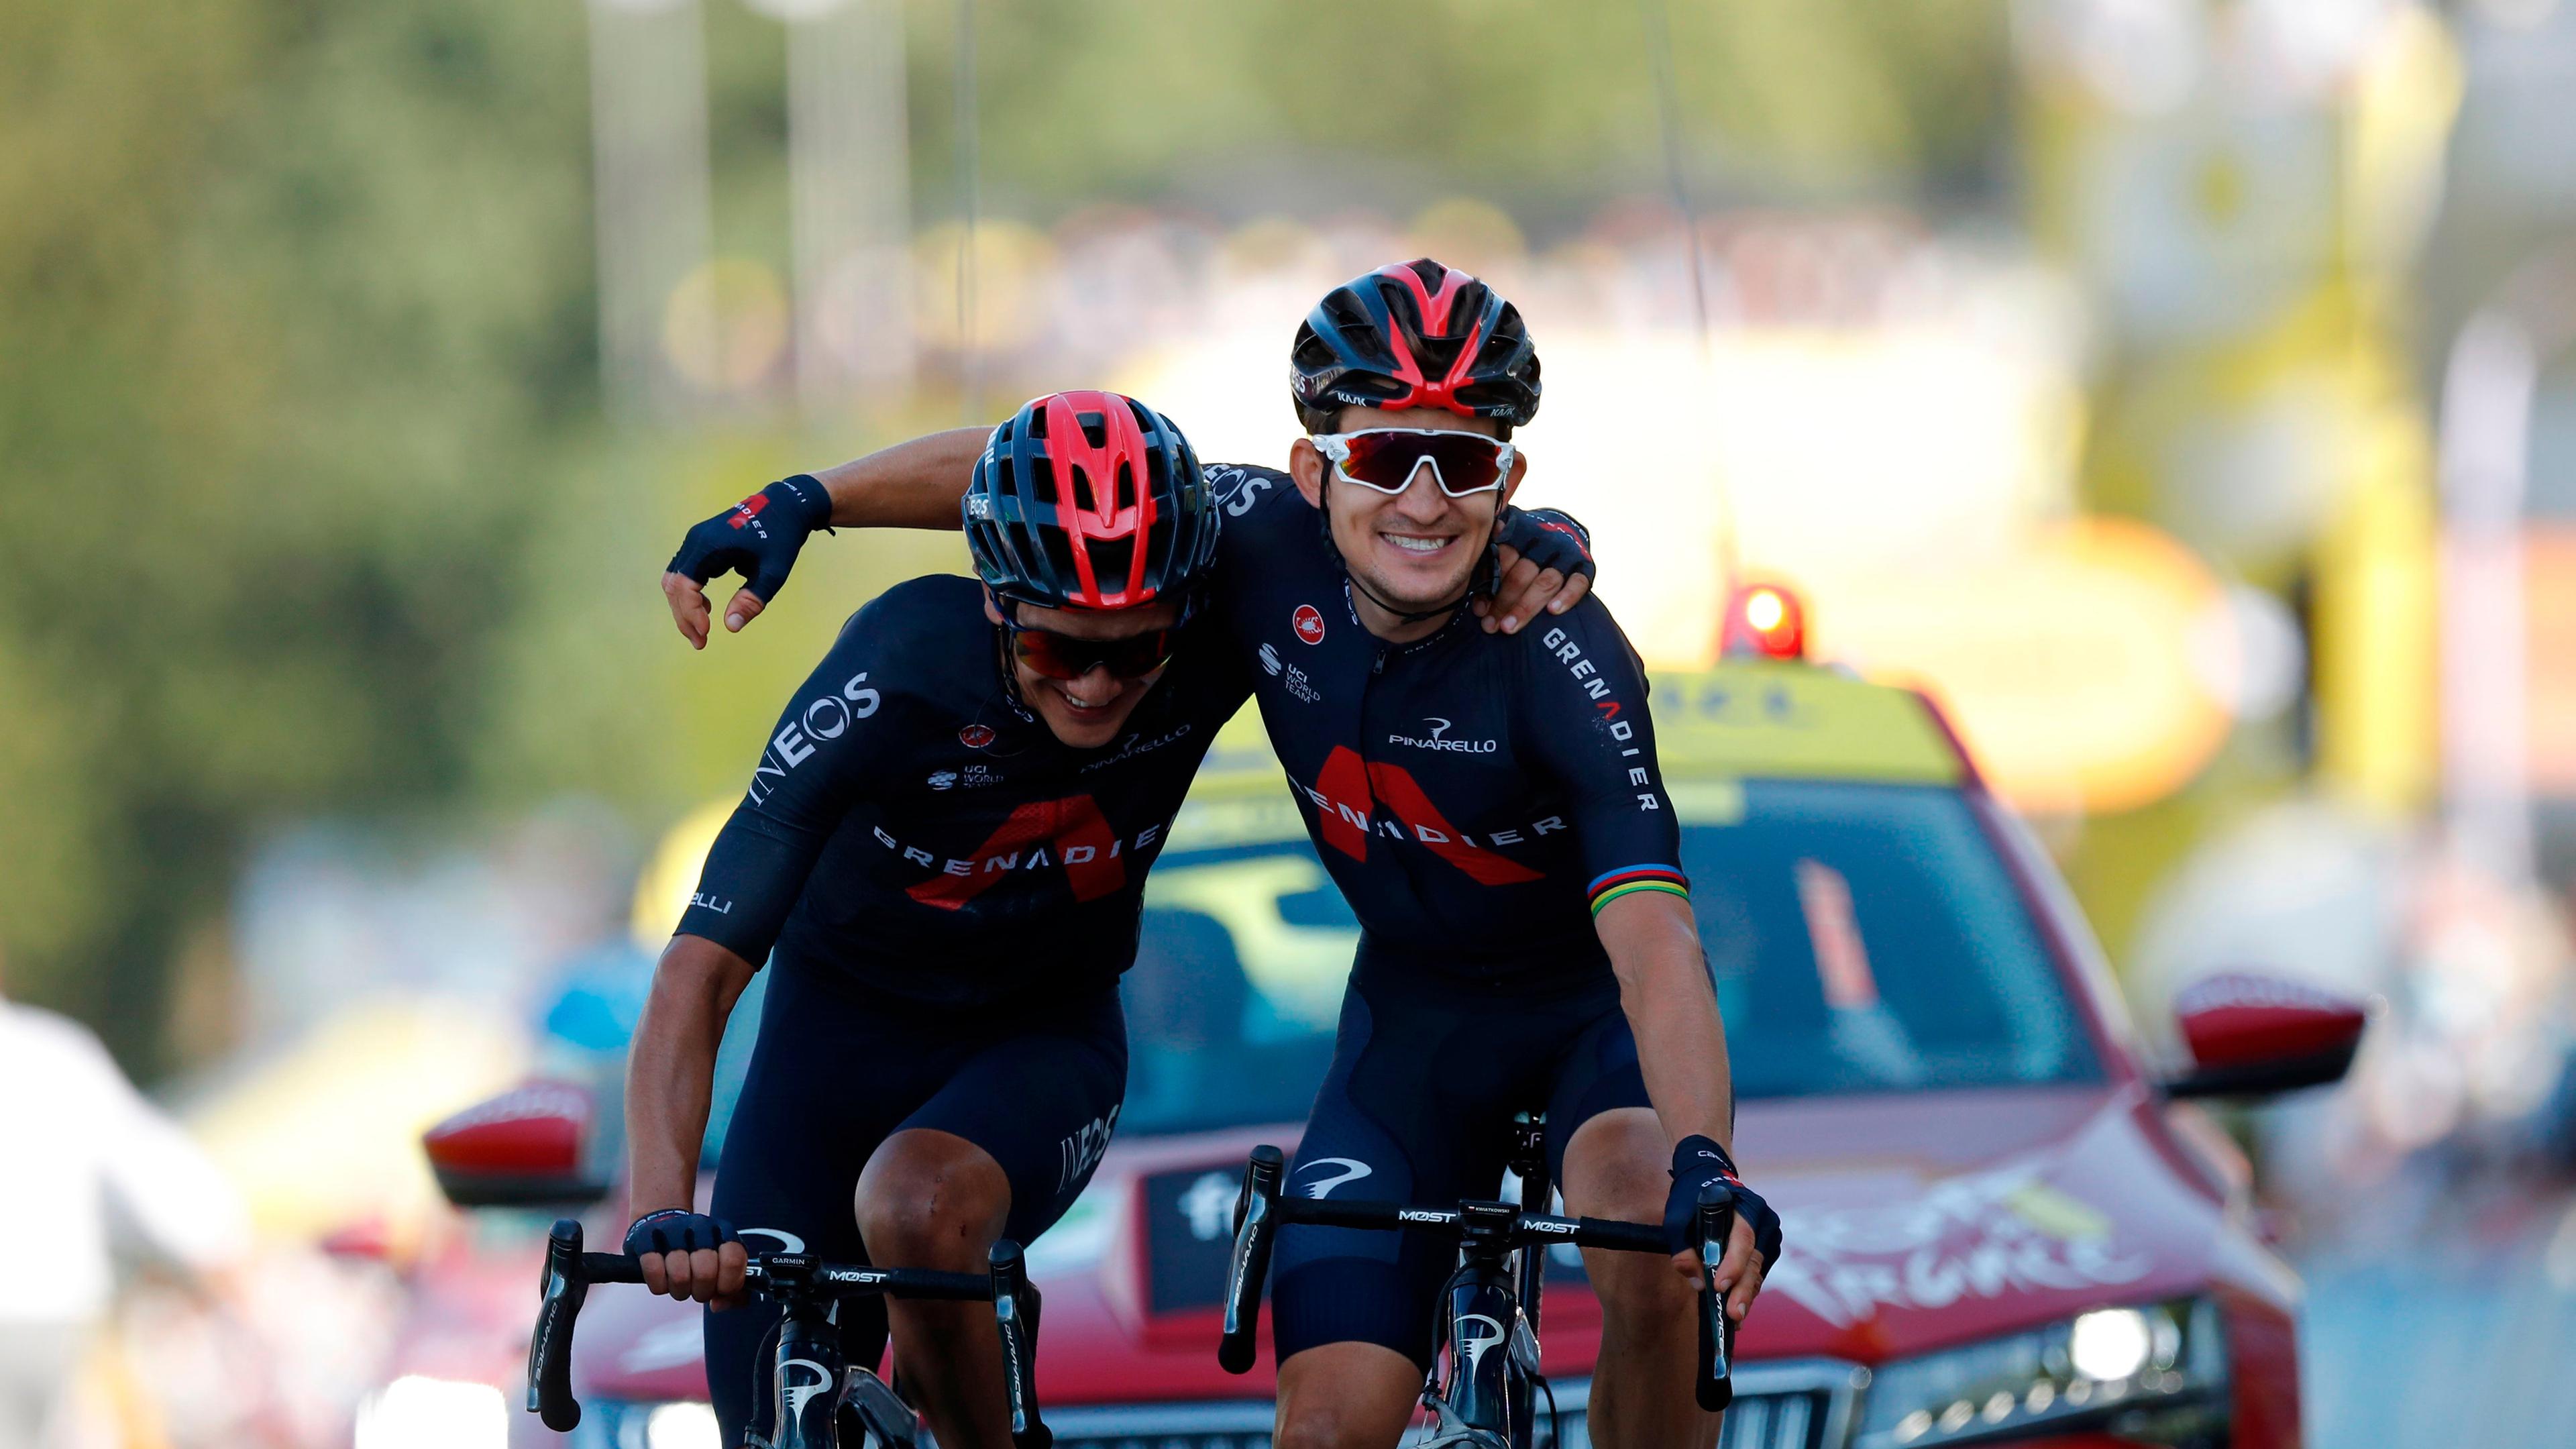 Team Ineos rider Poland's Michal Kwiatkowski (R) celebrates as he crosses the finish line ahead of Team Ineos rider Ecuador's Richard Carapaz during the 18th stage of the 107th edition of the Tour de France cycling race, 168 km between Meribel and La Roche sur Foron, on September 17, 2020. (Photo by STEPHANE MAHE / POOL / AFP)